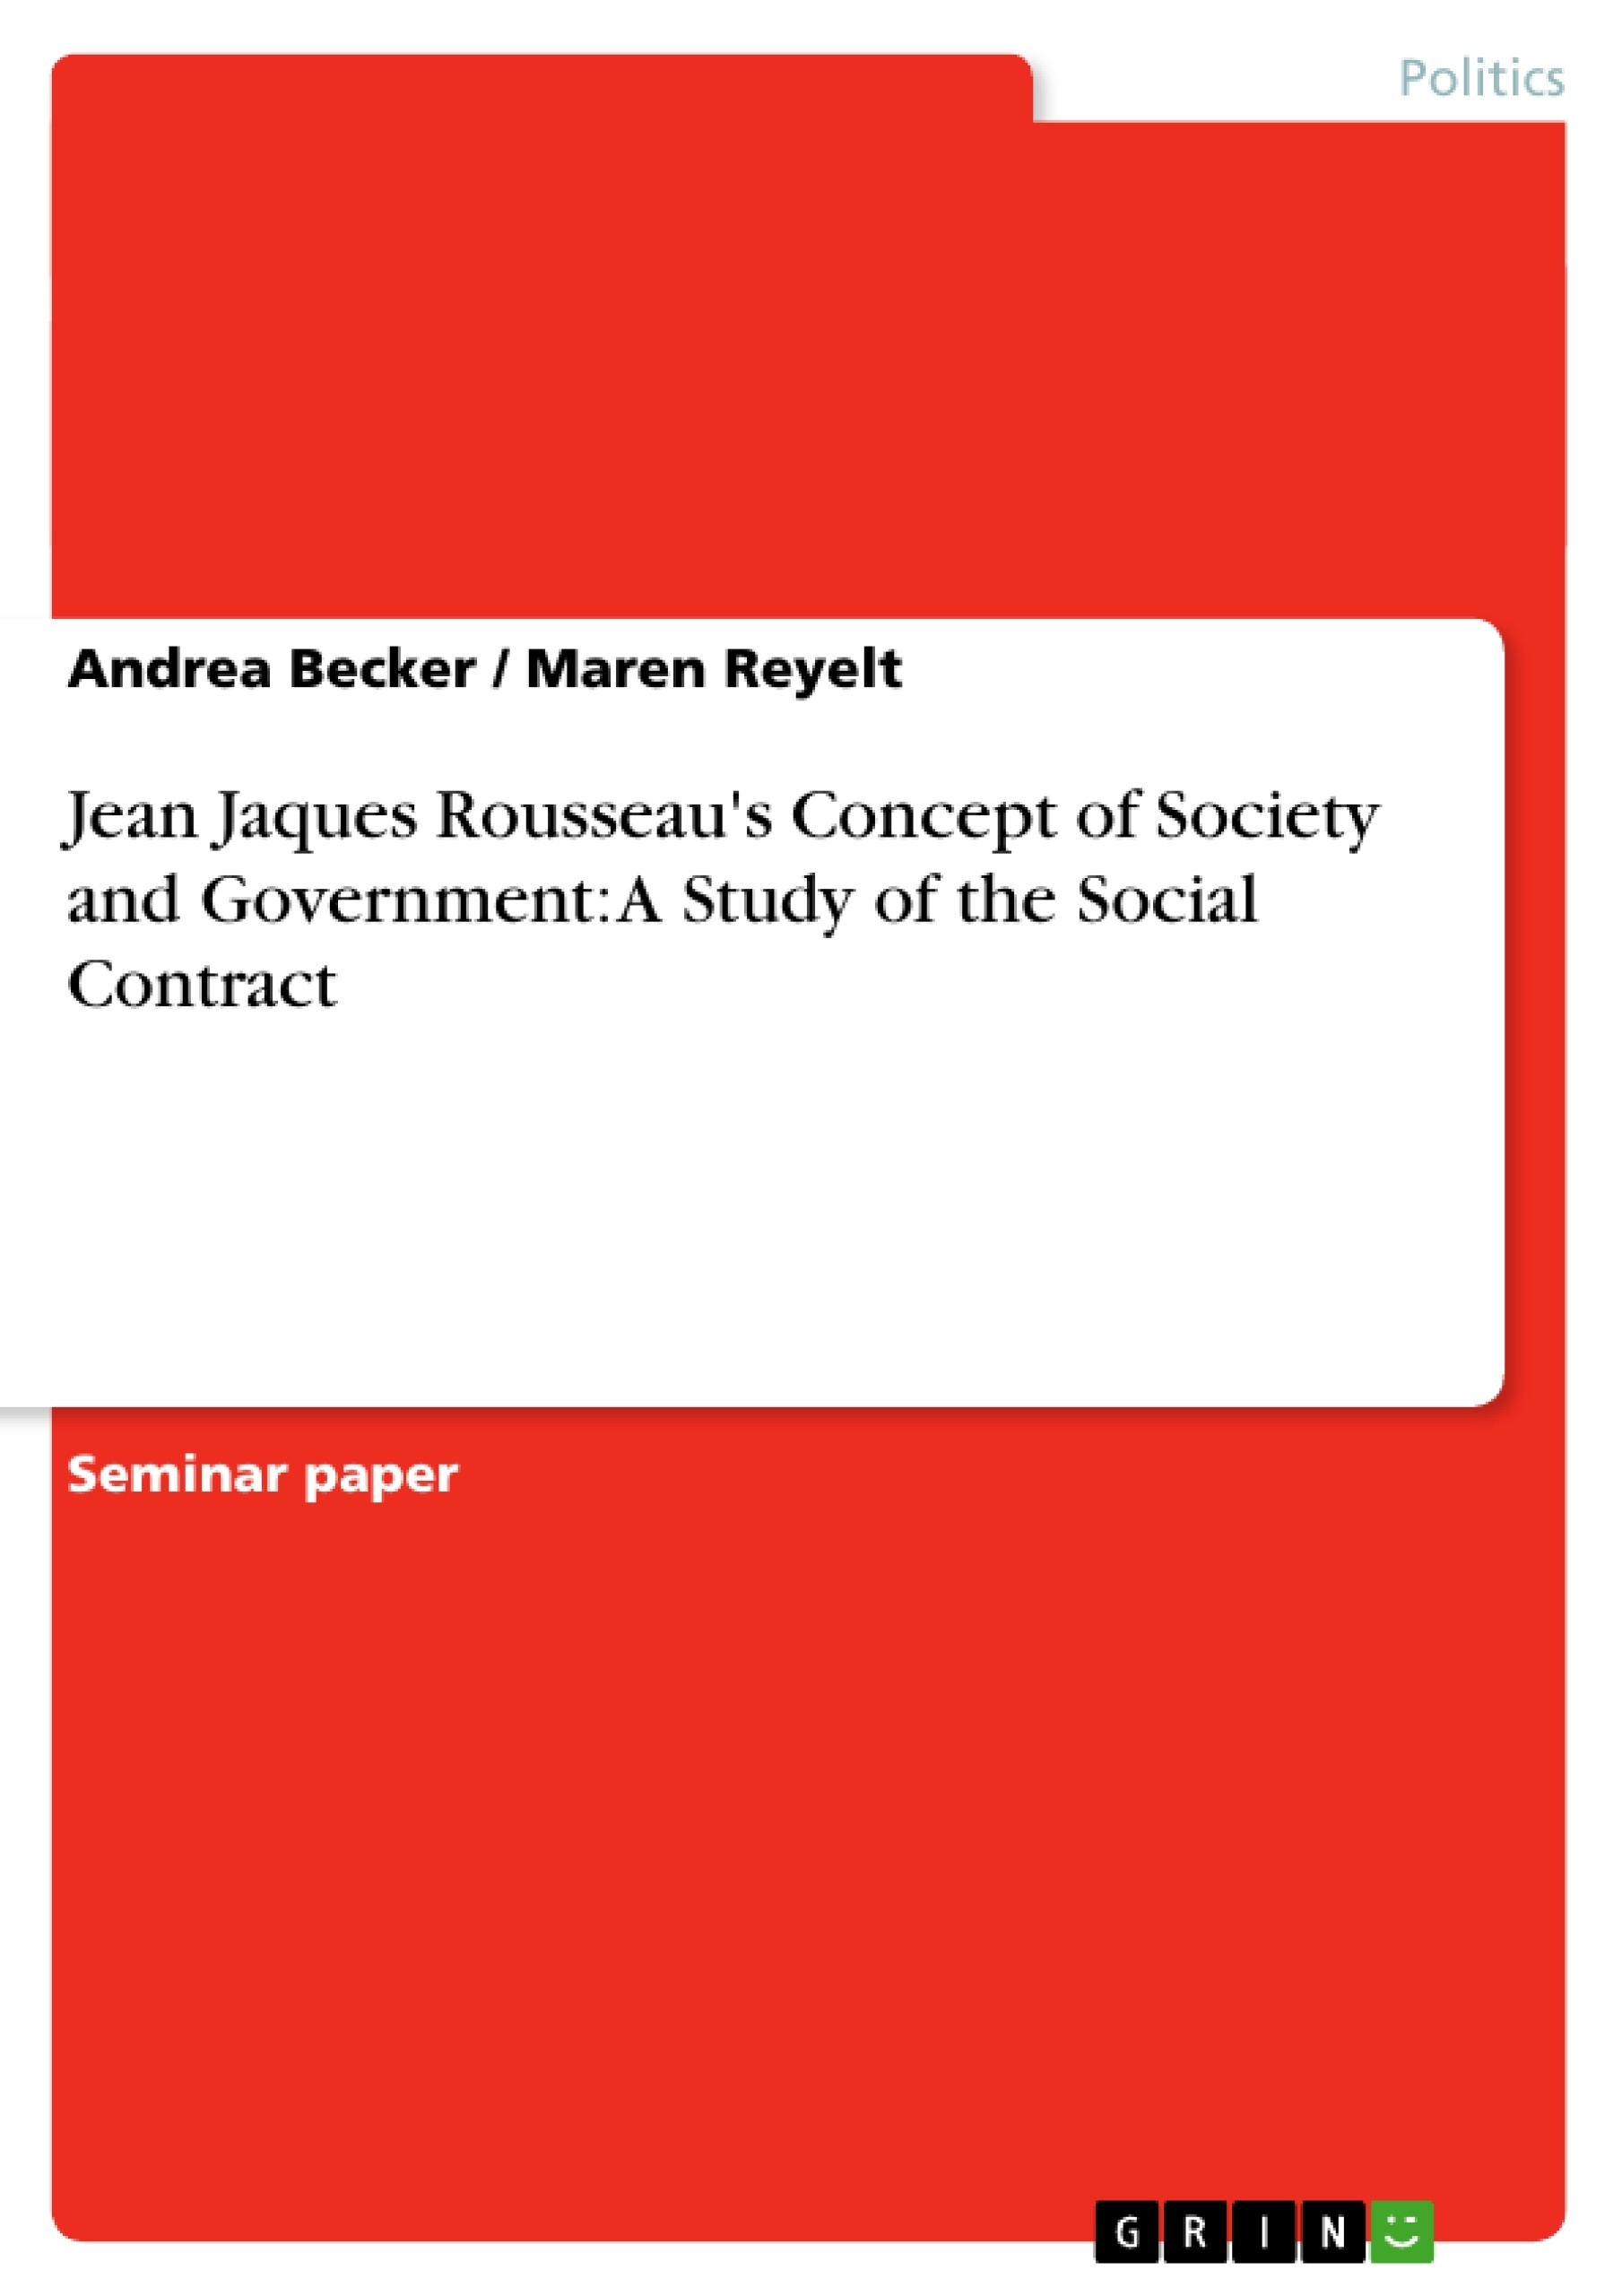 Title: Jean Jaques Rousseau's Concept of Society and Government: A Study of the Social Contract